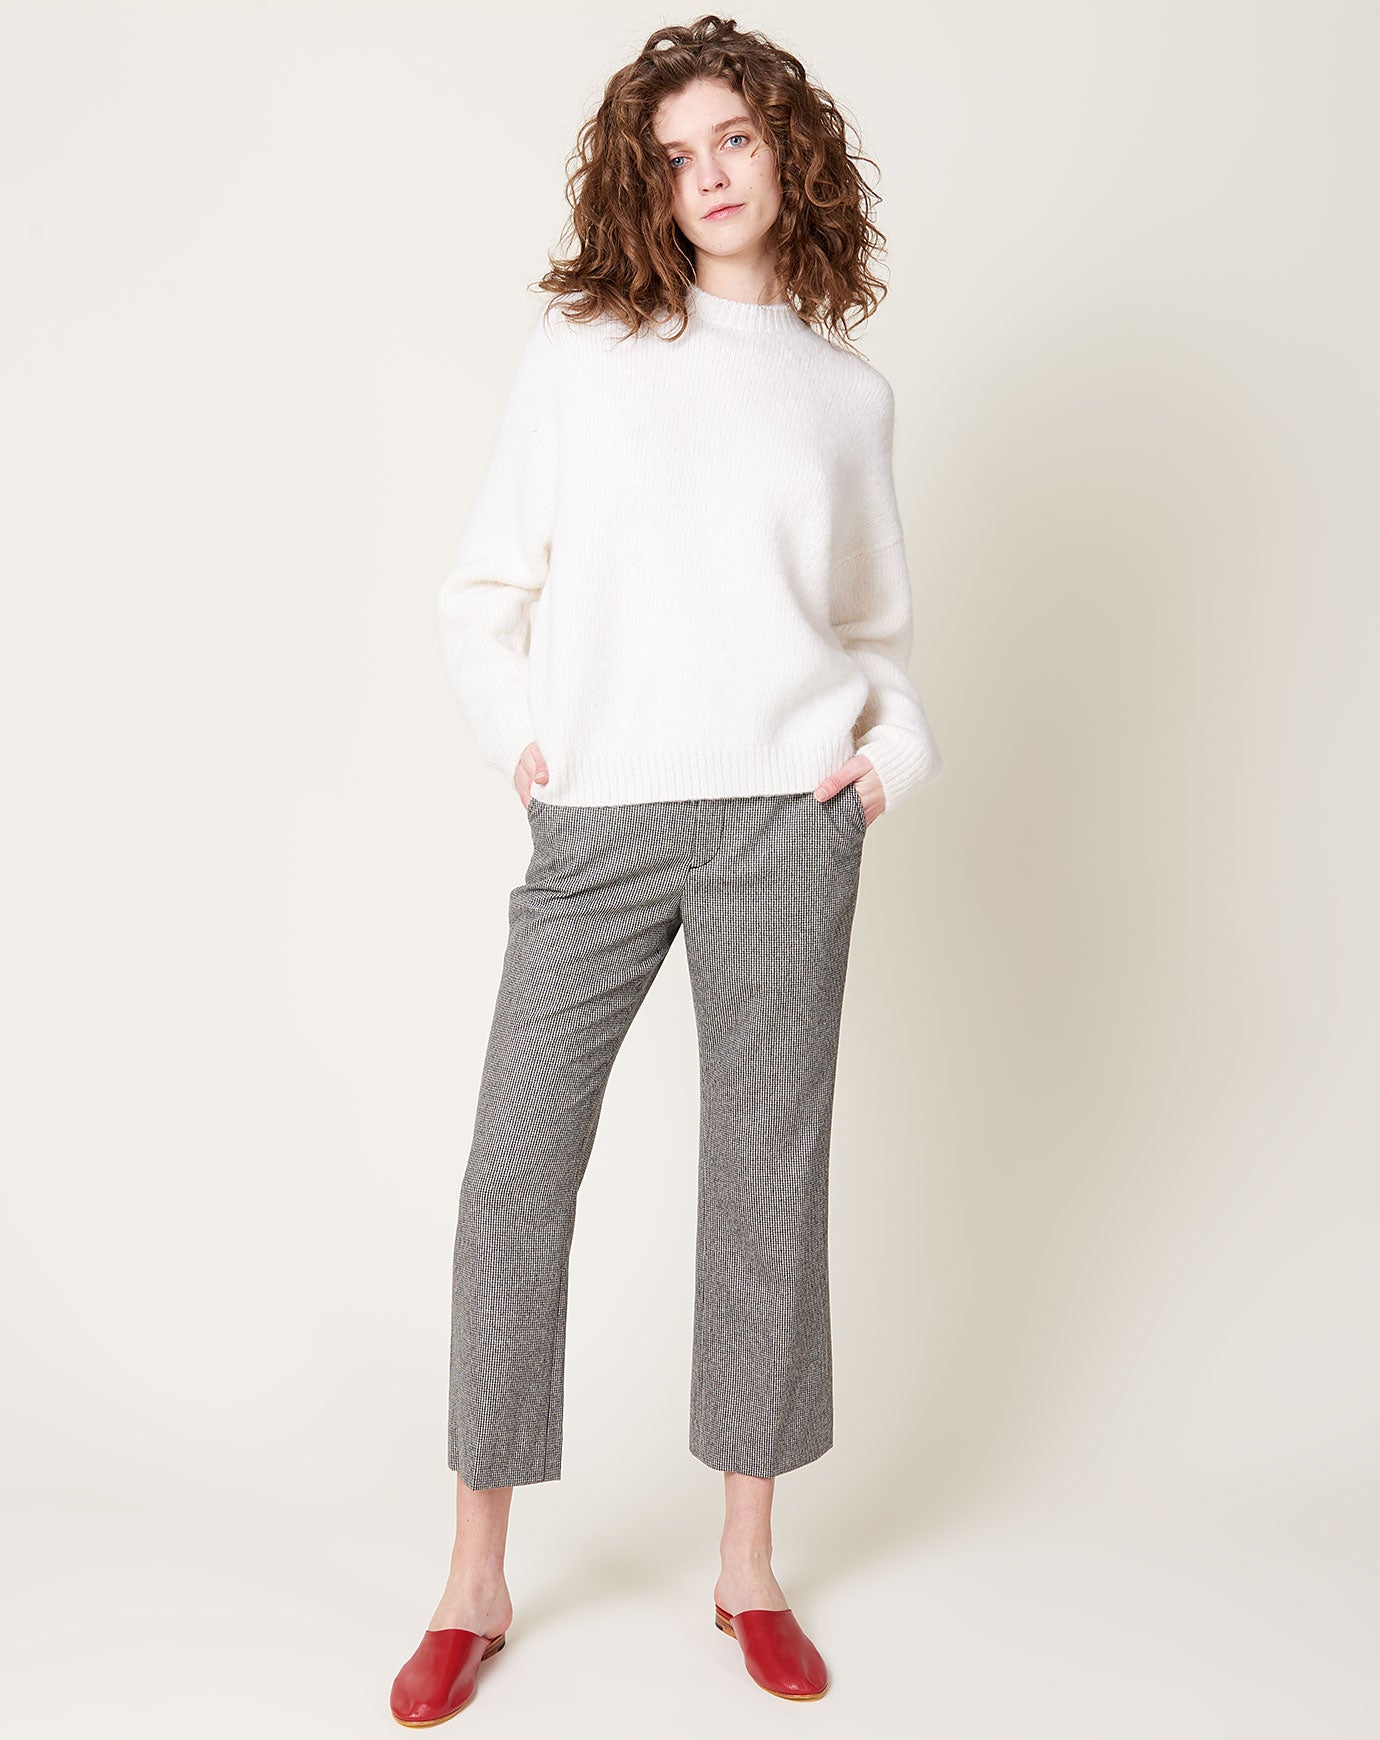 Ladies Denim Cropped Trousers, Comfortable pull on style.